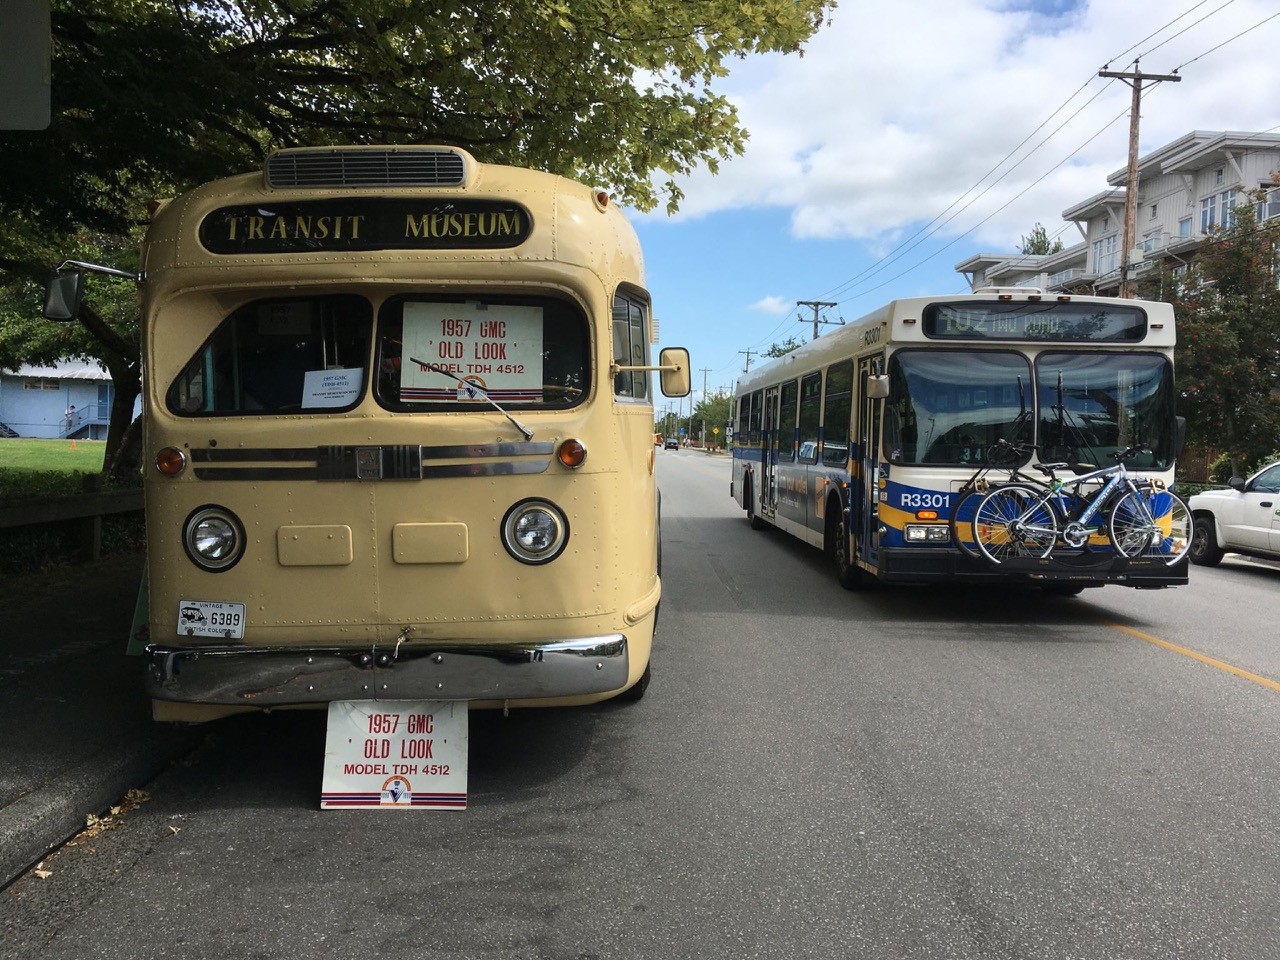 Vintage cream coloured bus next to a BC Transit bus on a street